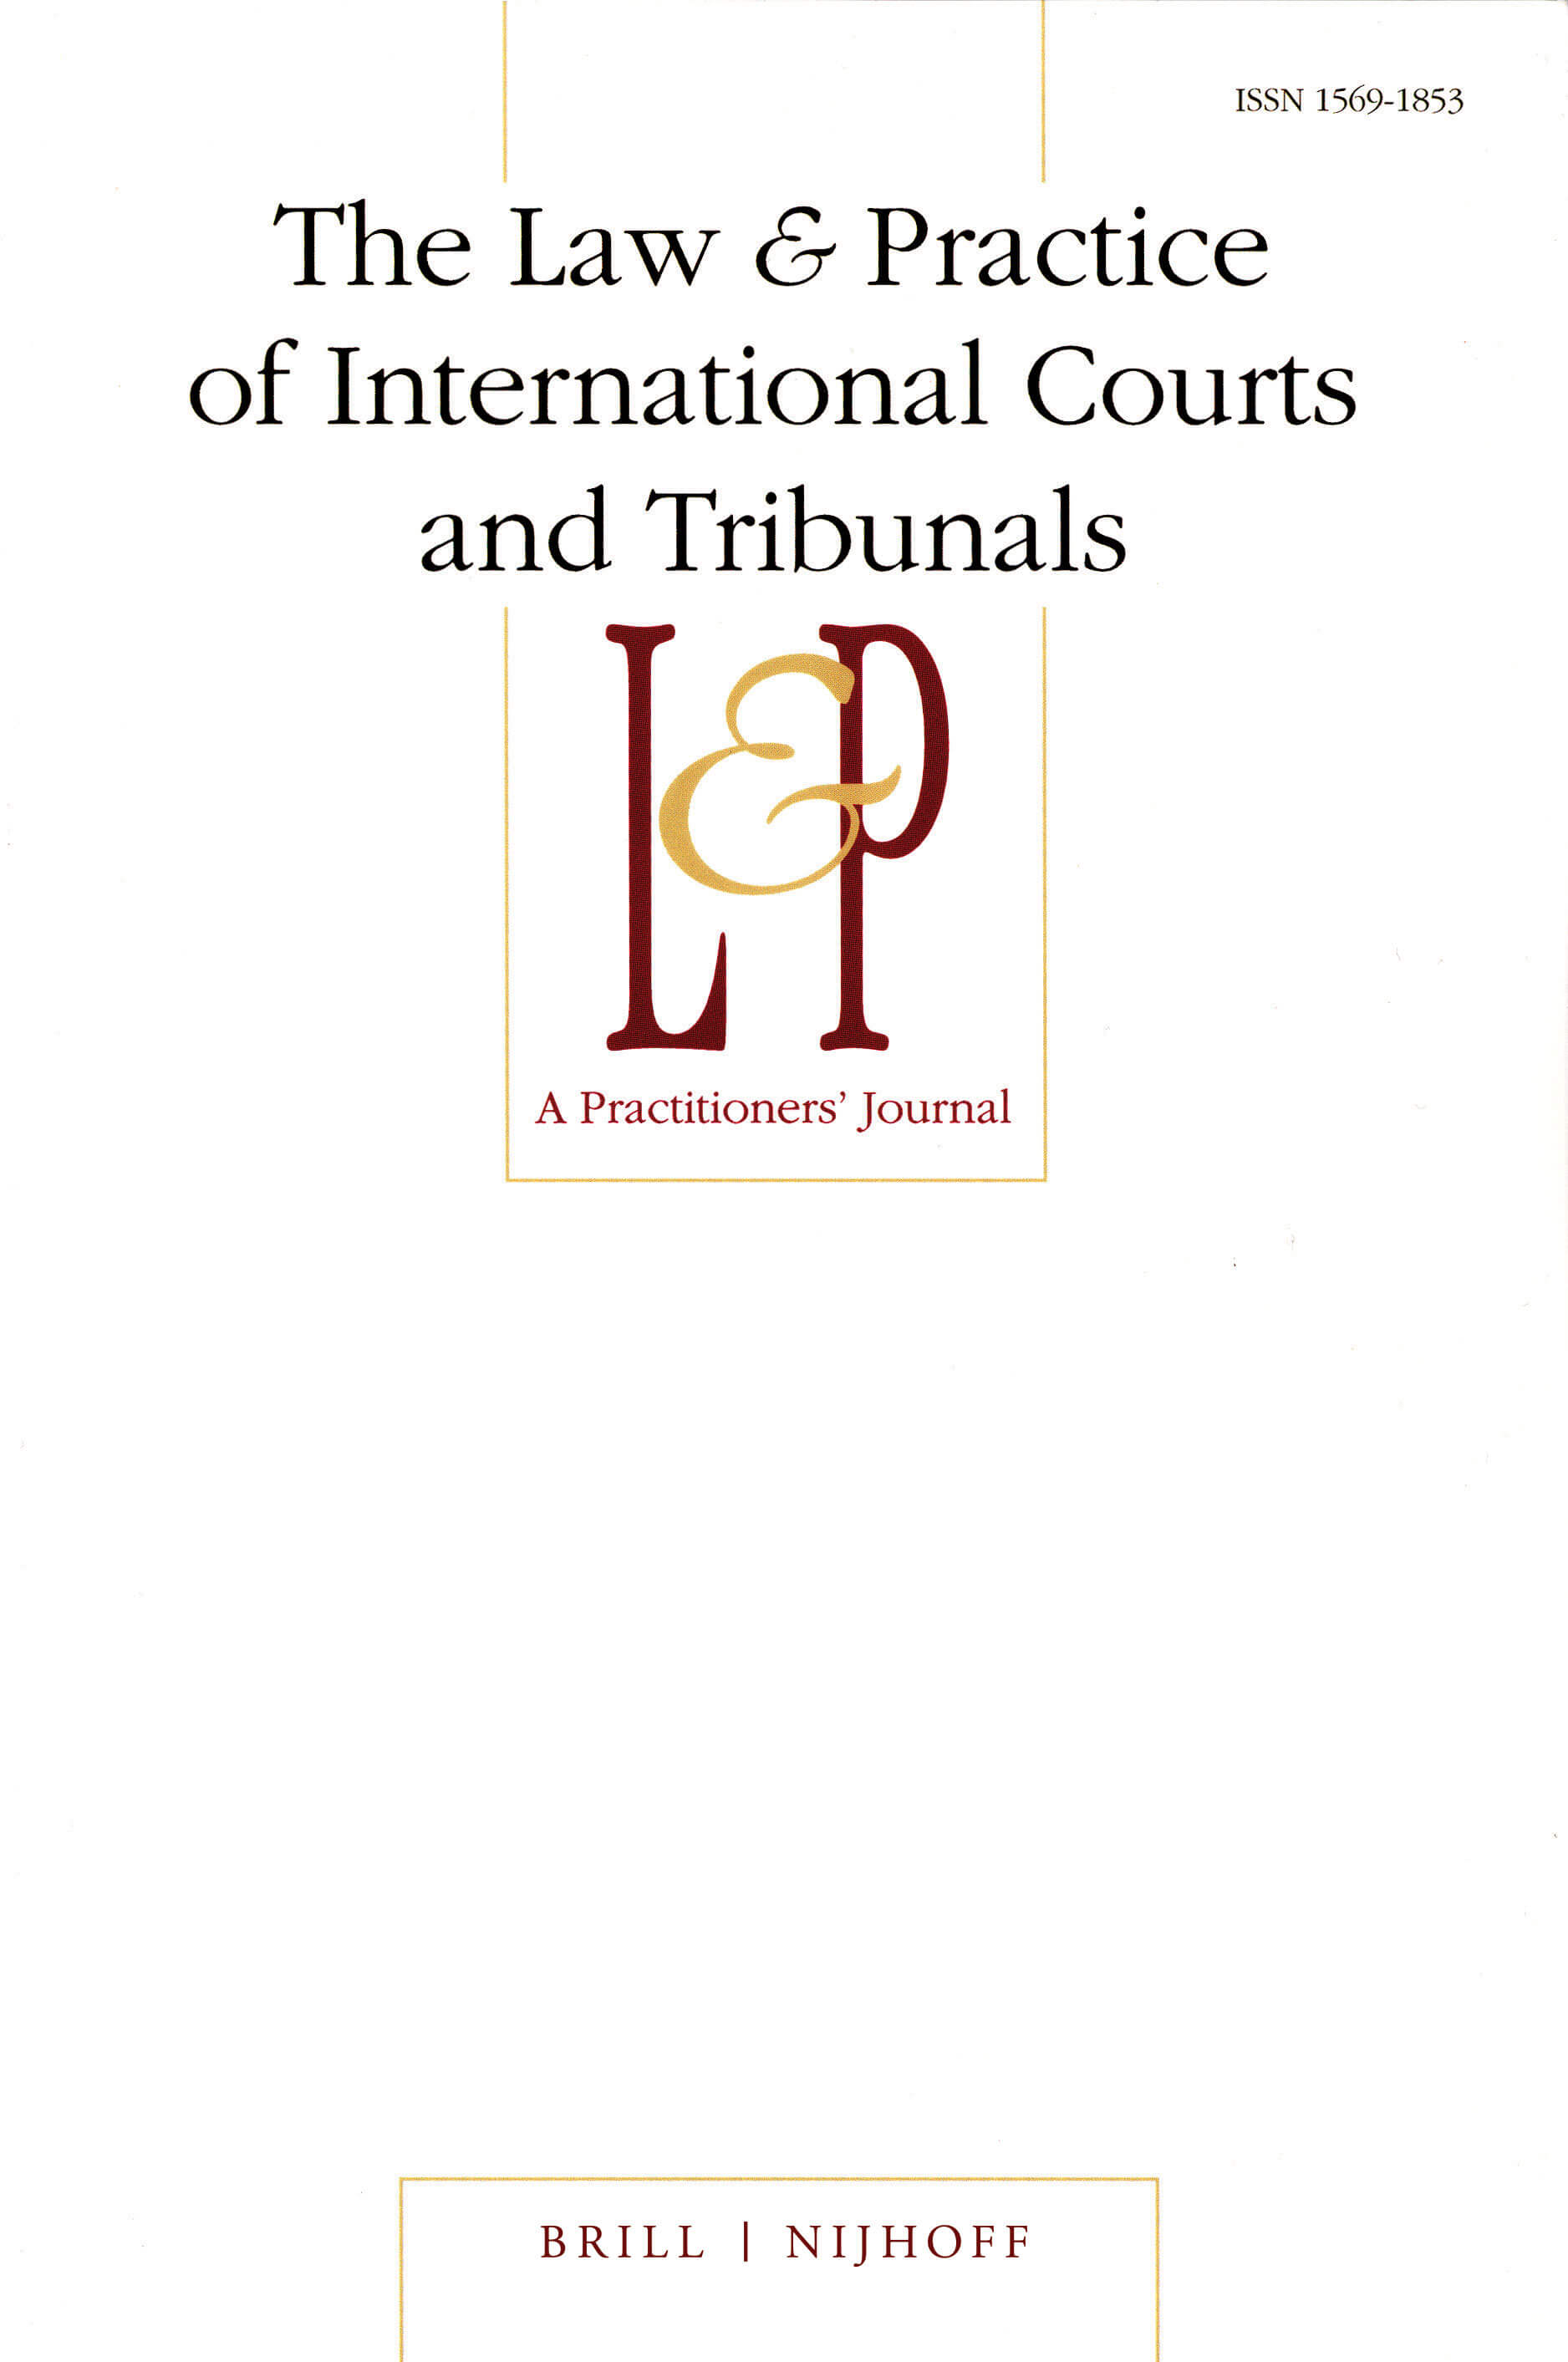 The Law & Practice of International Courts and Tribunals